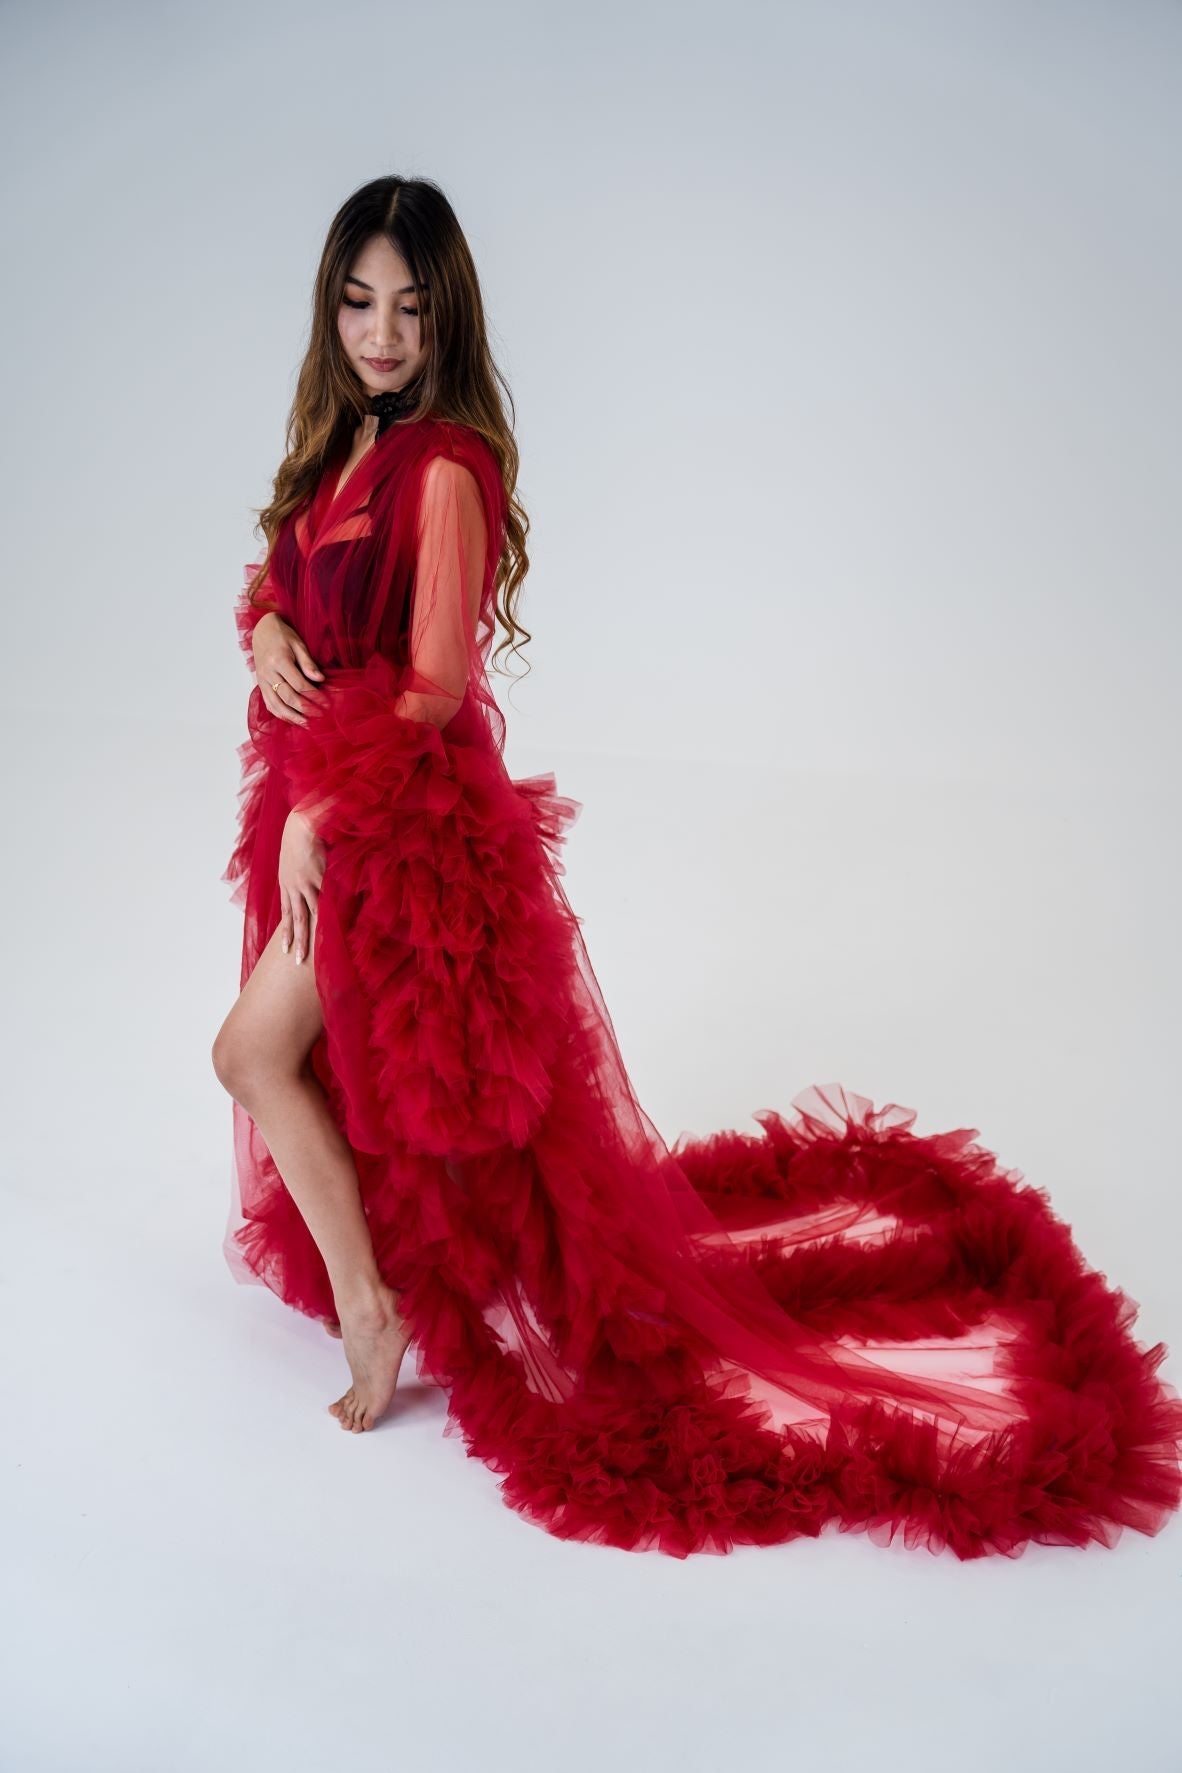 Dress Hire - Maternity Photoshoot Dresses - Sophie - Wine Red Tulle Robe - 4 DAY RENTAL - Luxe Bumps AU